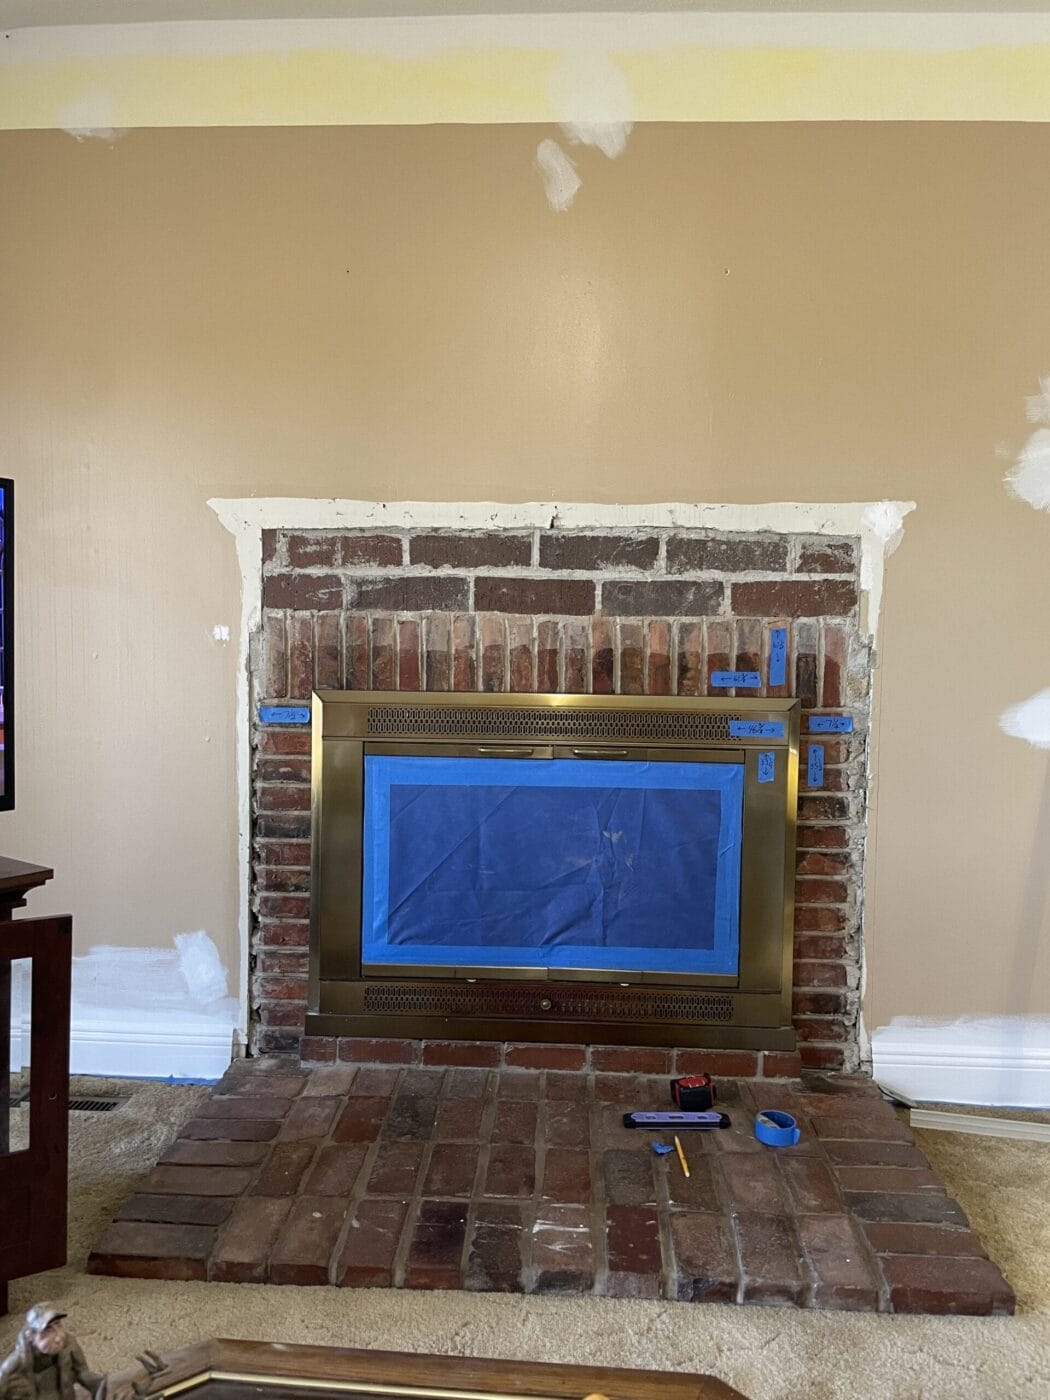 Before the completion of a fireplace surround project that uses GenStone's Desert Sunrise faux stone panels over brick.